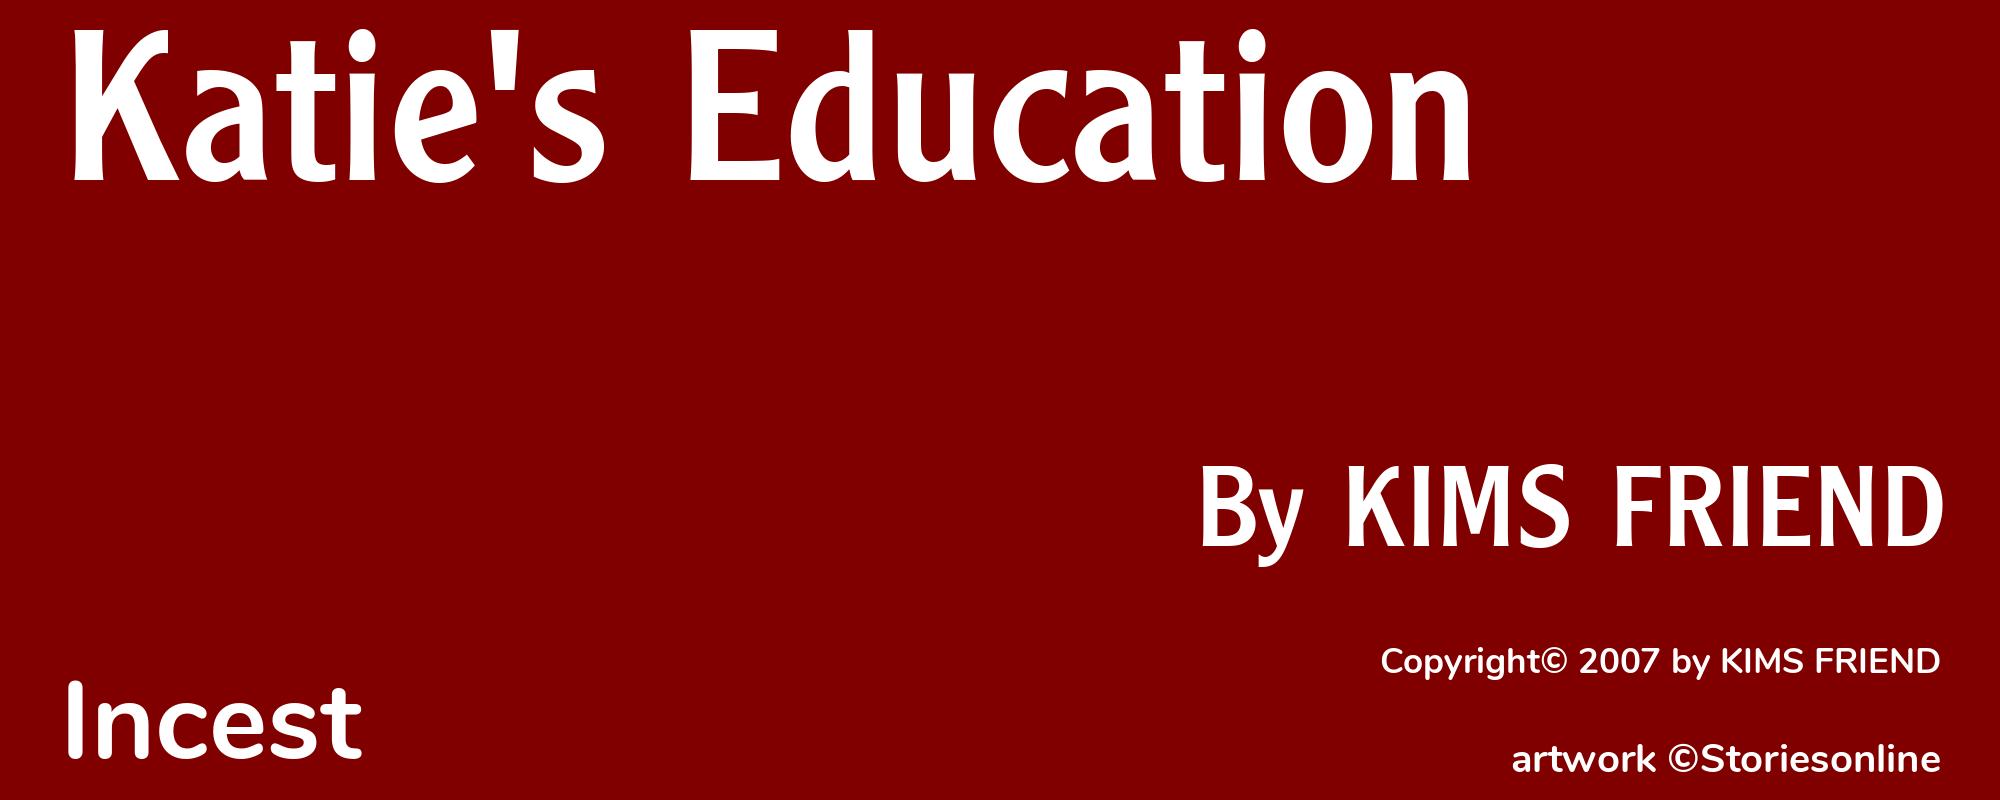 Katie's Education - Cover